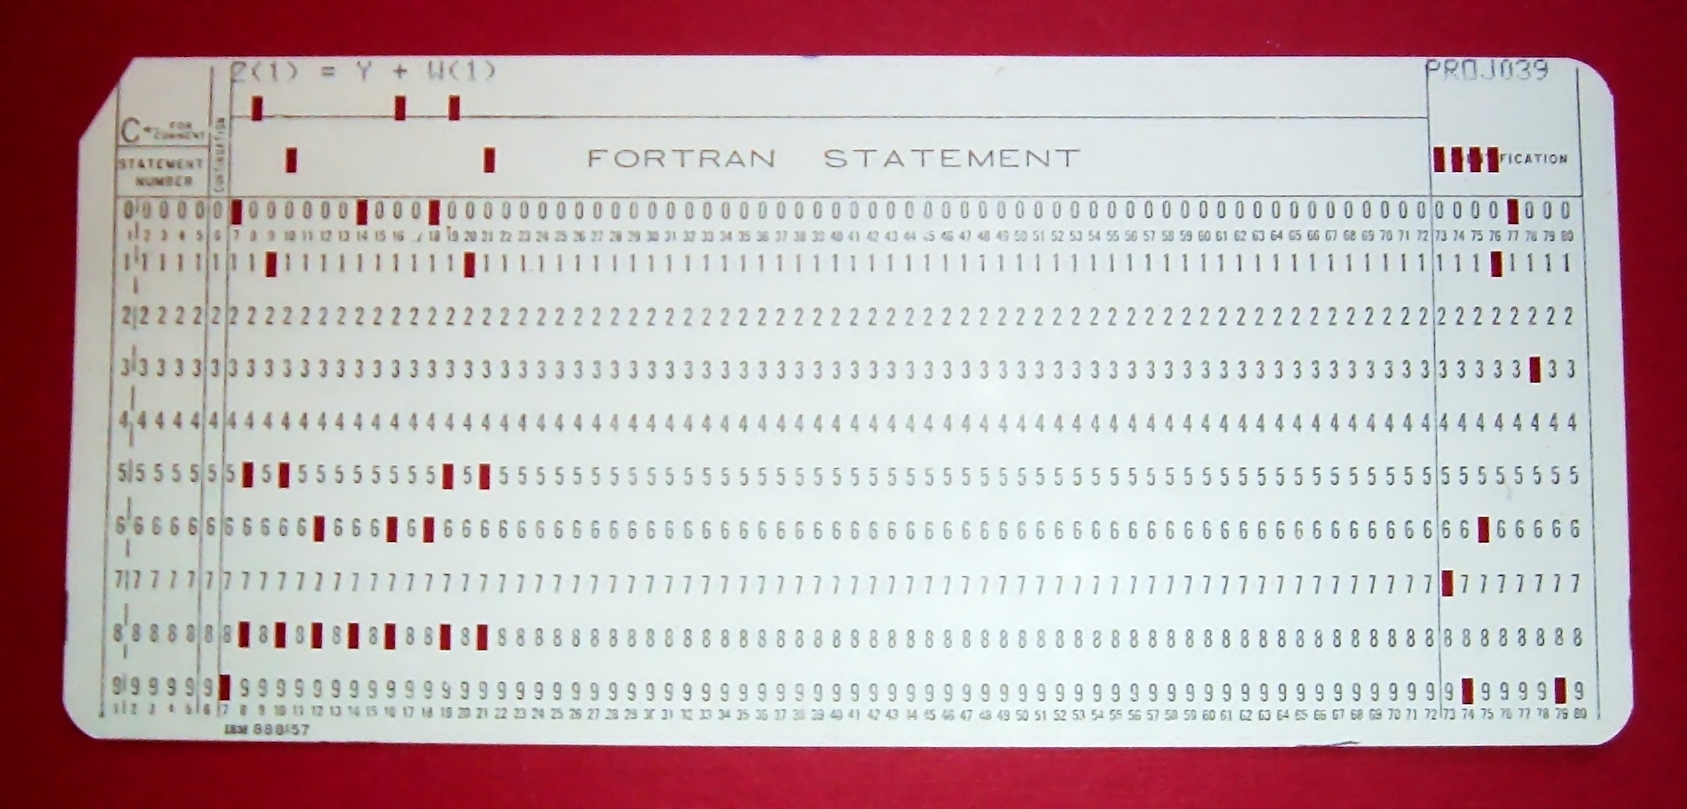 assembly - How binaries are generated using Punched cards